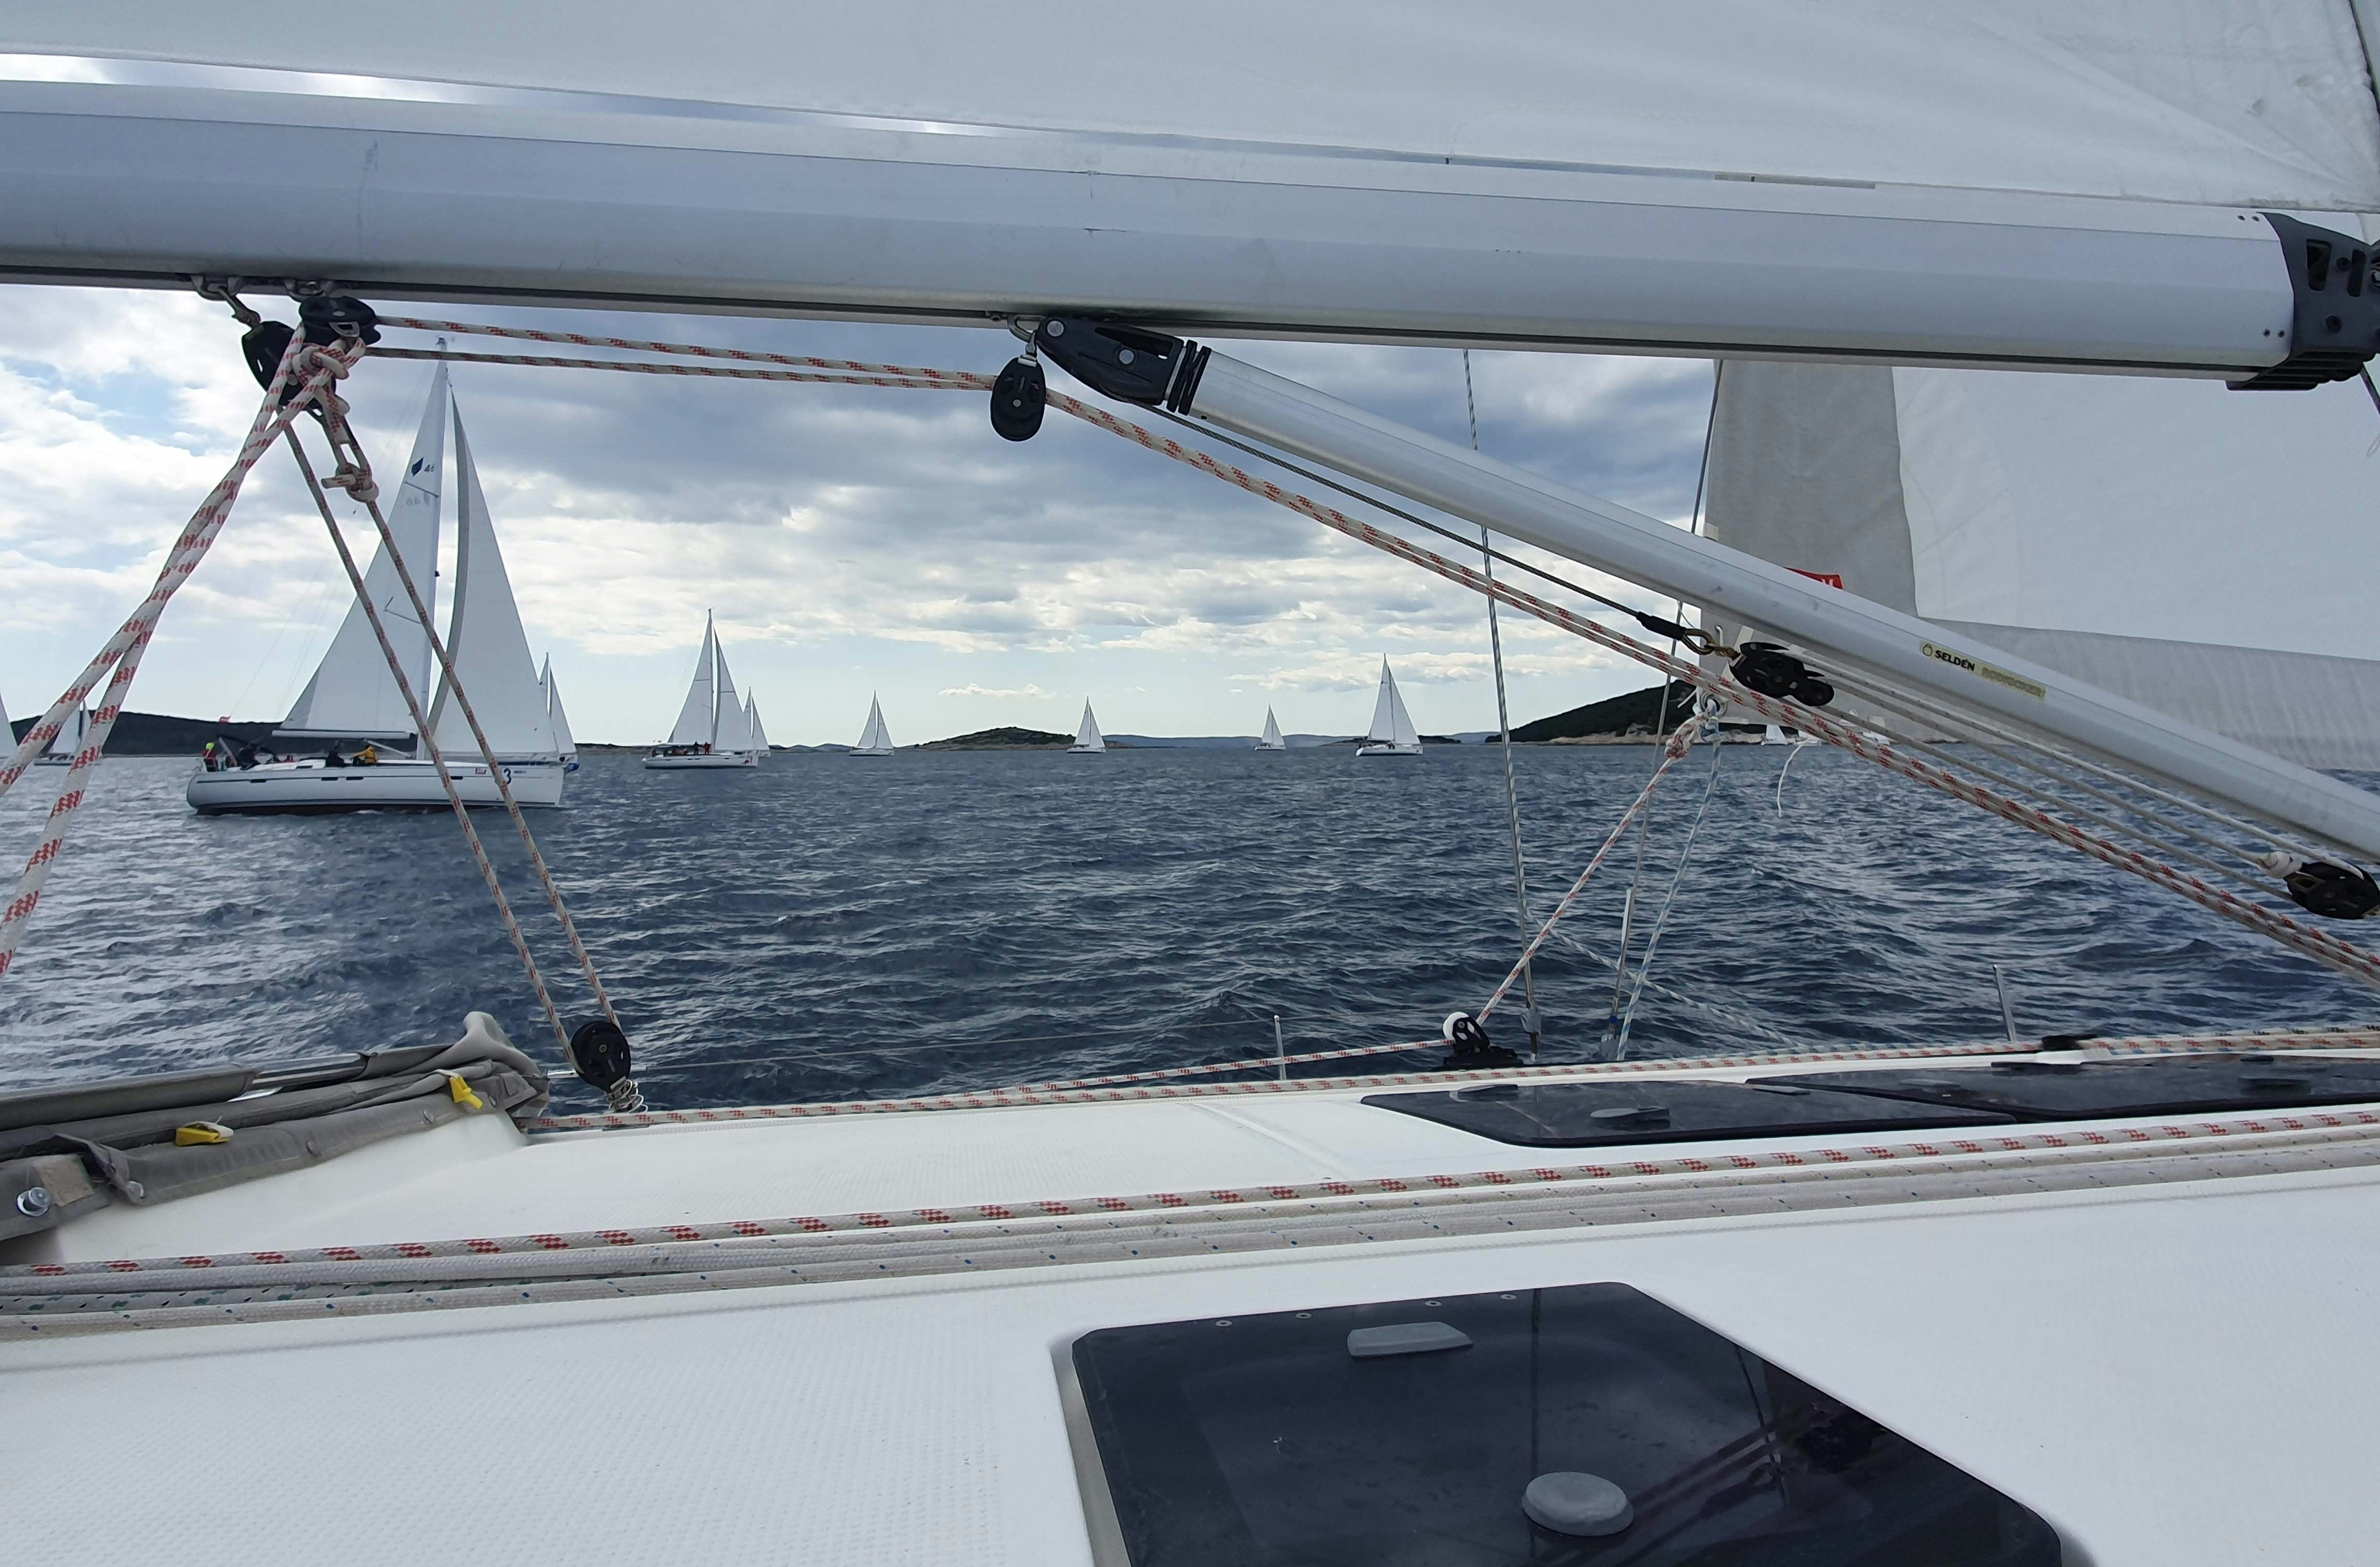 View of the Bavaria 46 boats at the regatta.